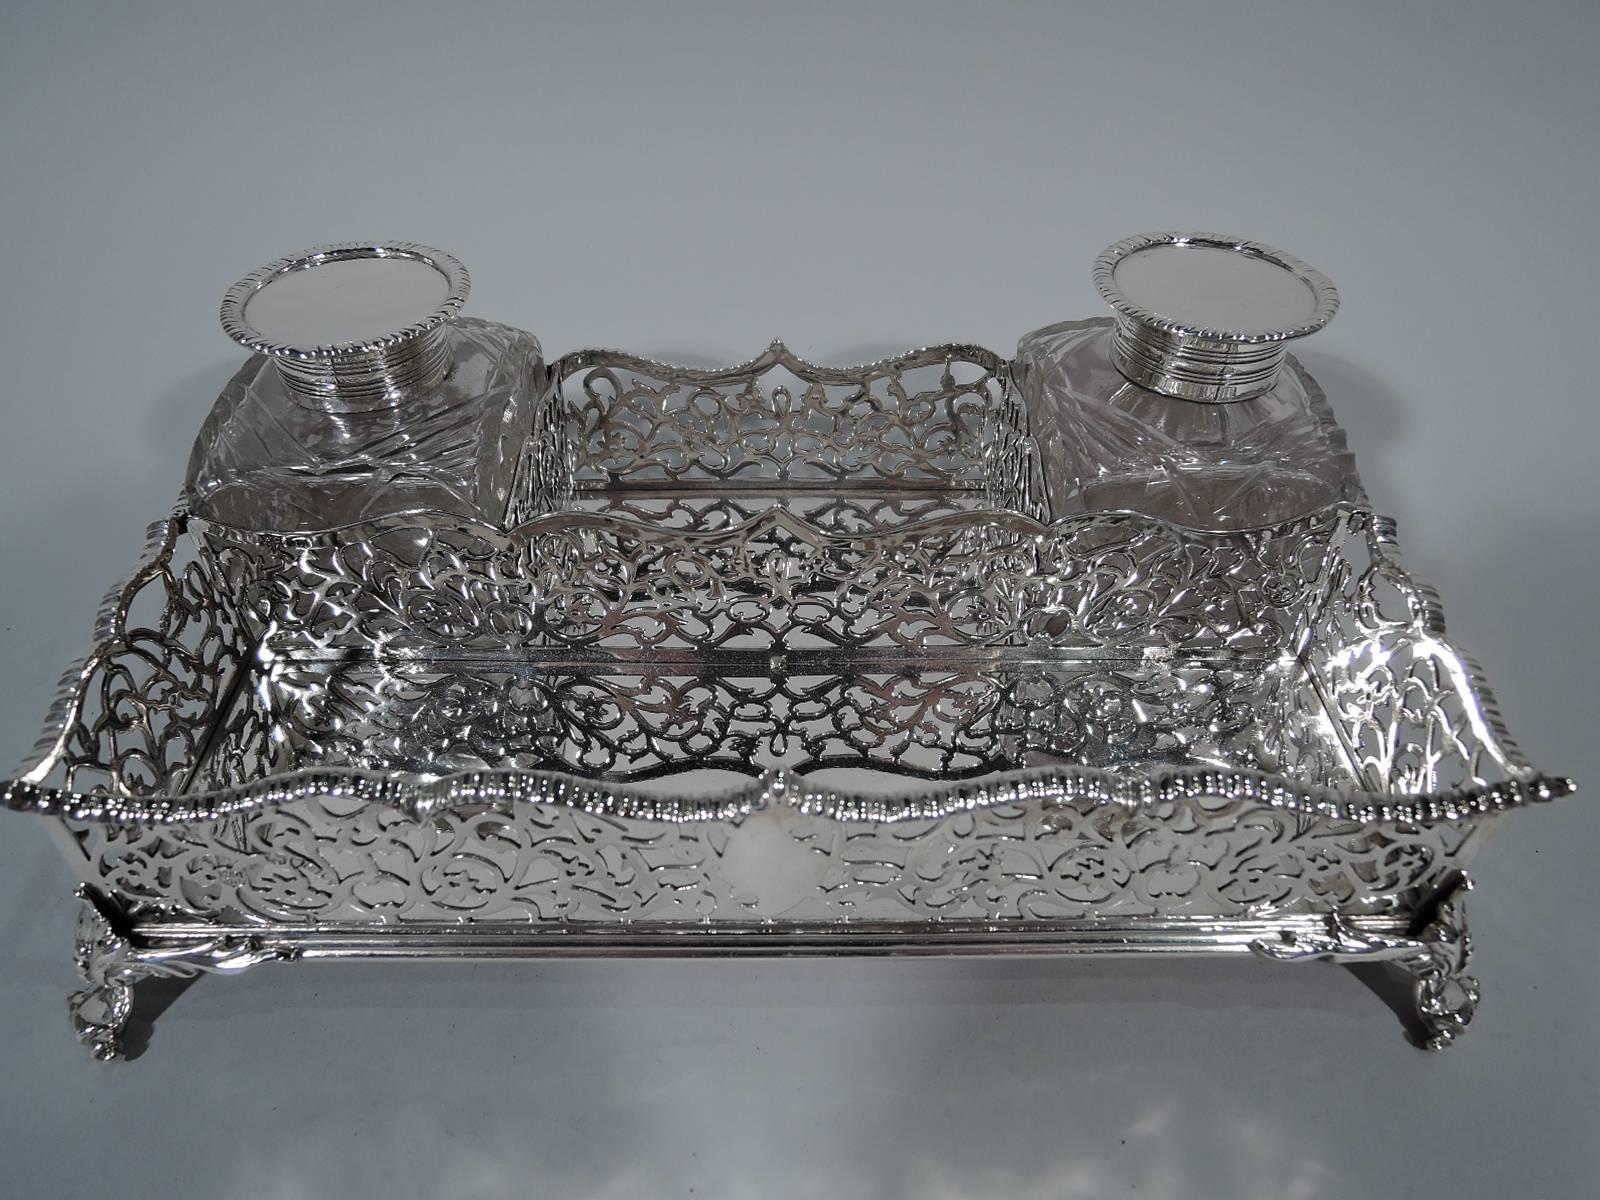 Victorian sterling silver stand with two inkpots. Made by William Gibson & John Langman in London in 1889. Stand is rectangular with solid well and four leaf-mounted volute-scroll supports. Sides are pierced scrollwork and rim is notched and wavy